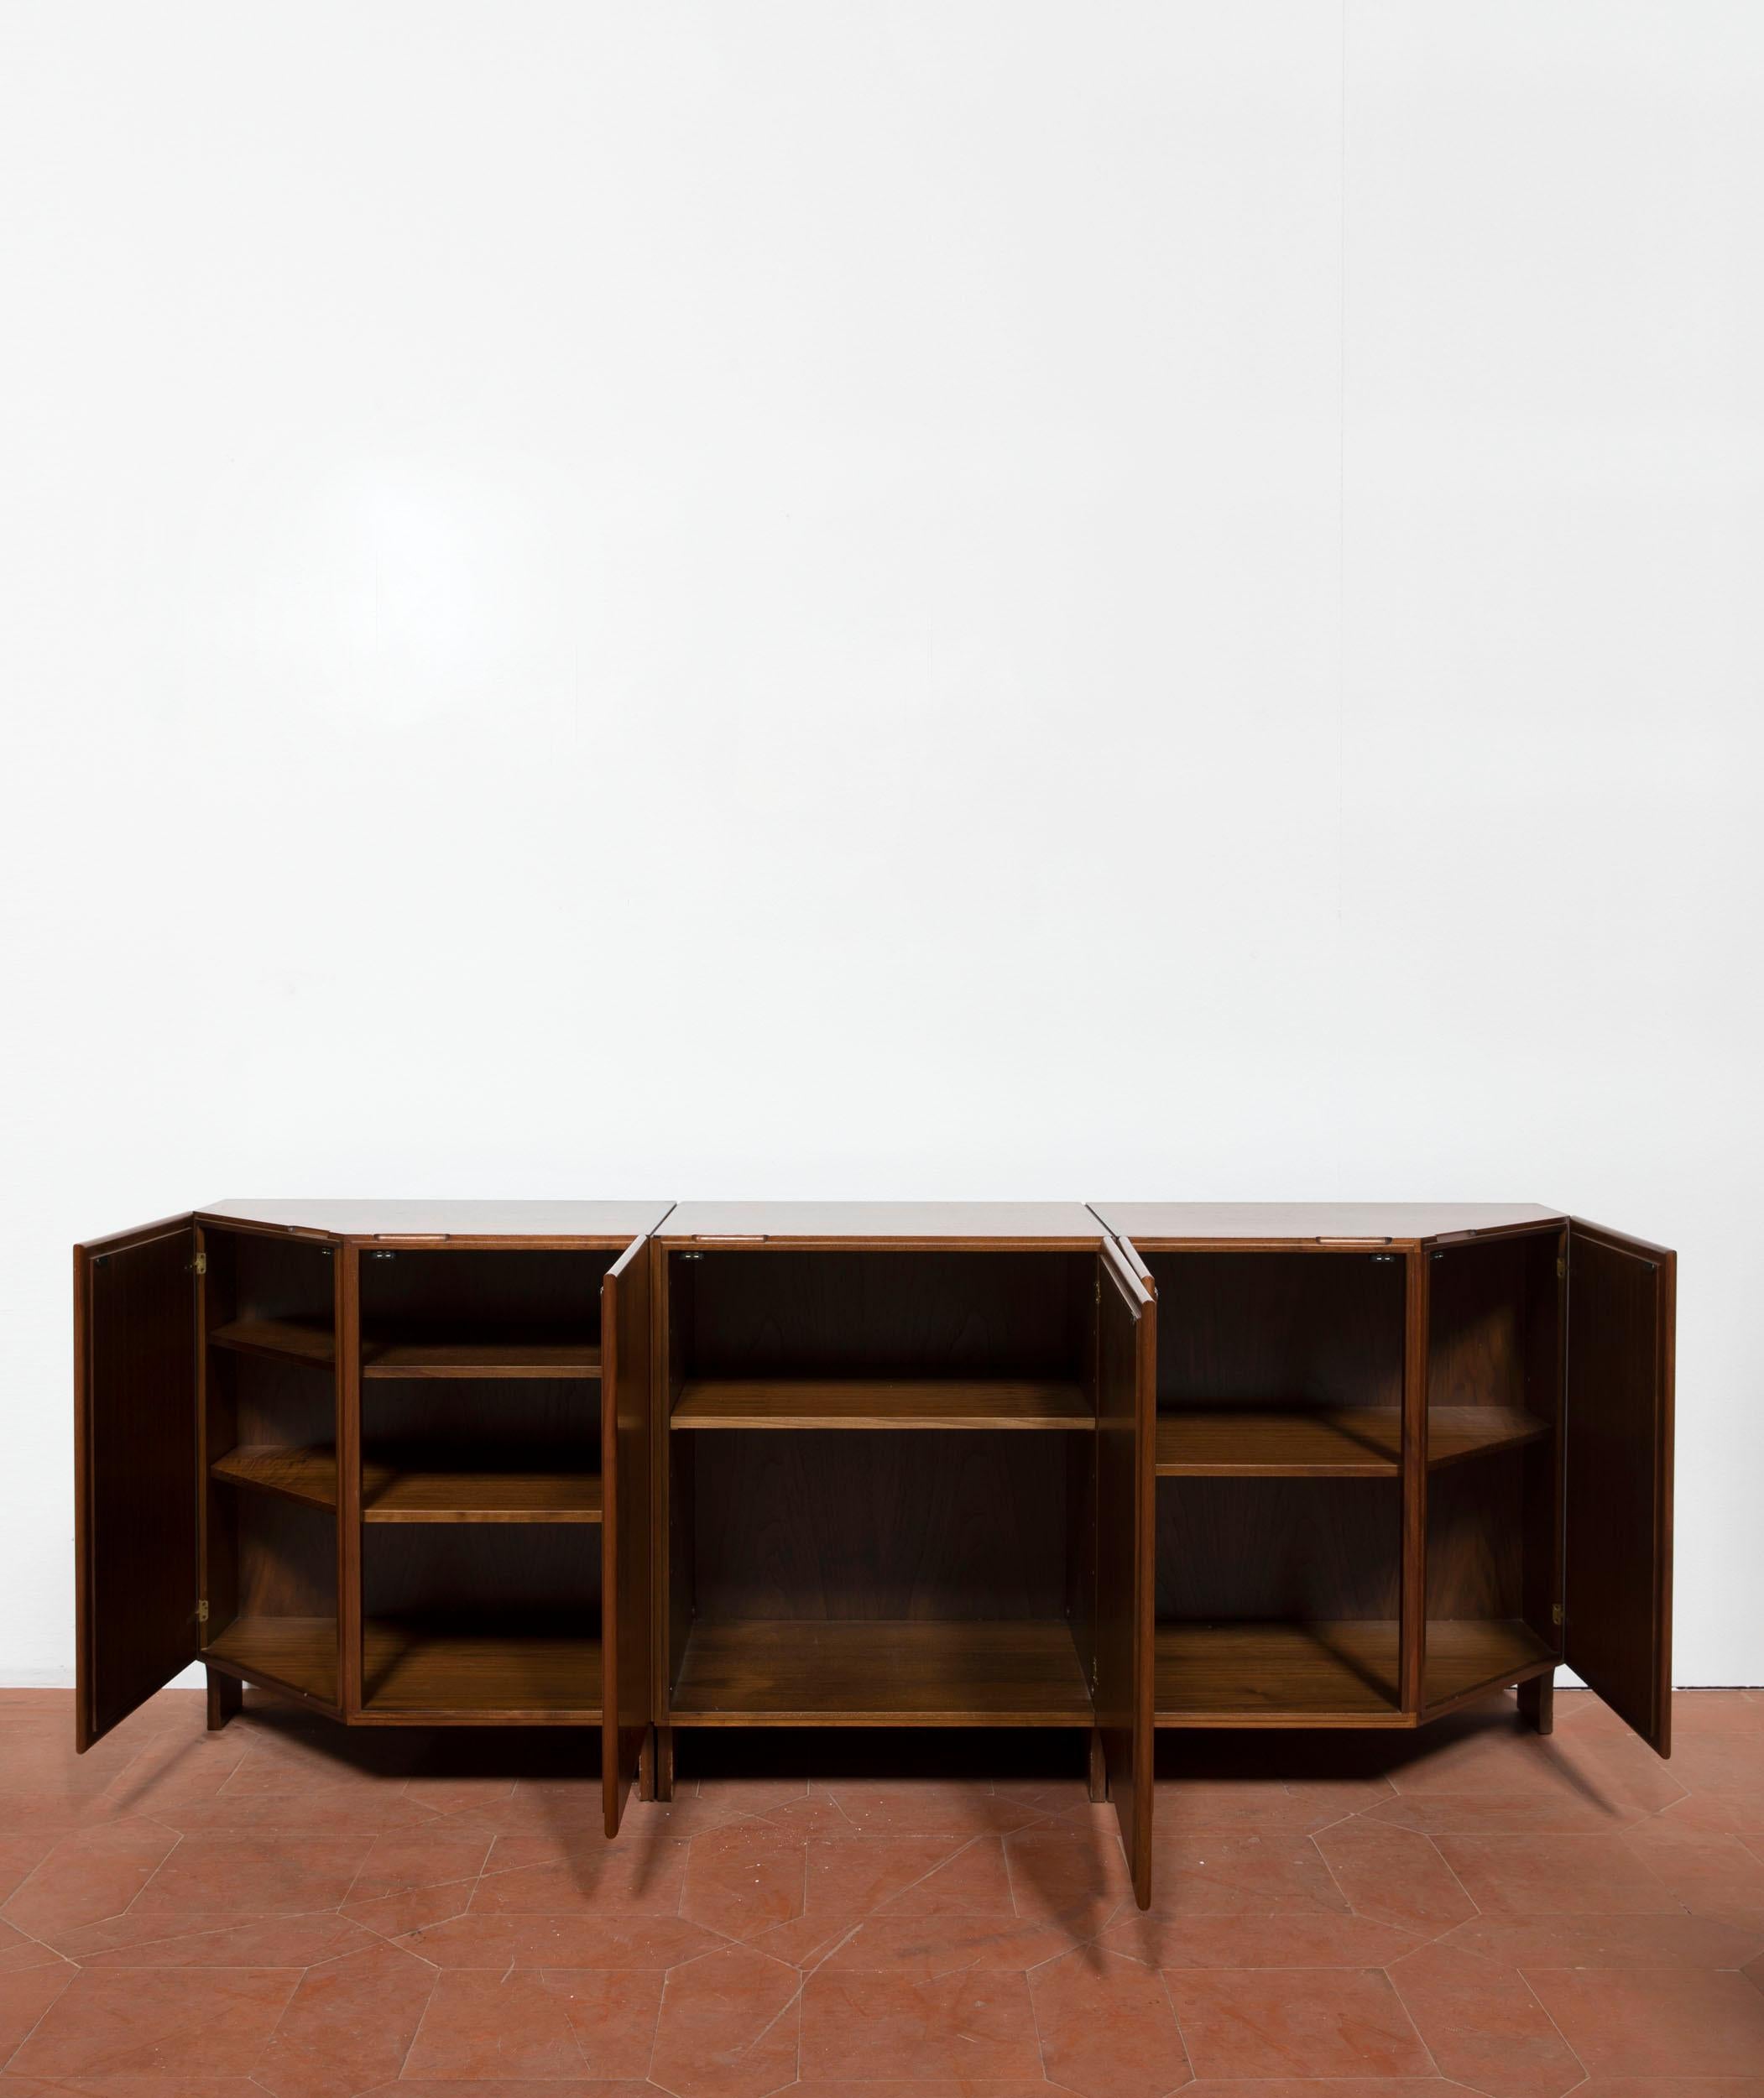 Franco Albini sideboard in walnuts wood. The elegant sideboard has five shutters and various shelves. This piece has a peculiar and geometrical shape.